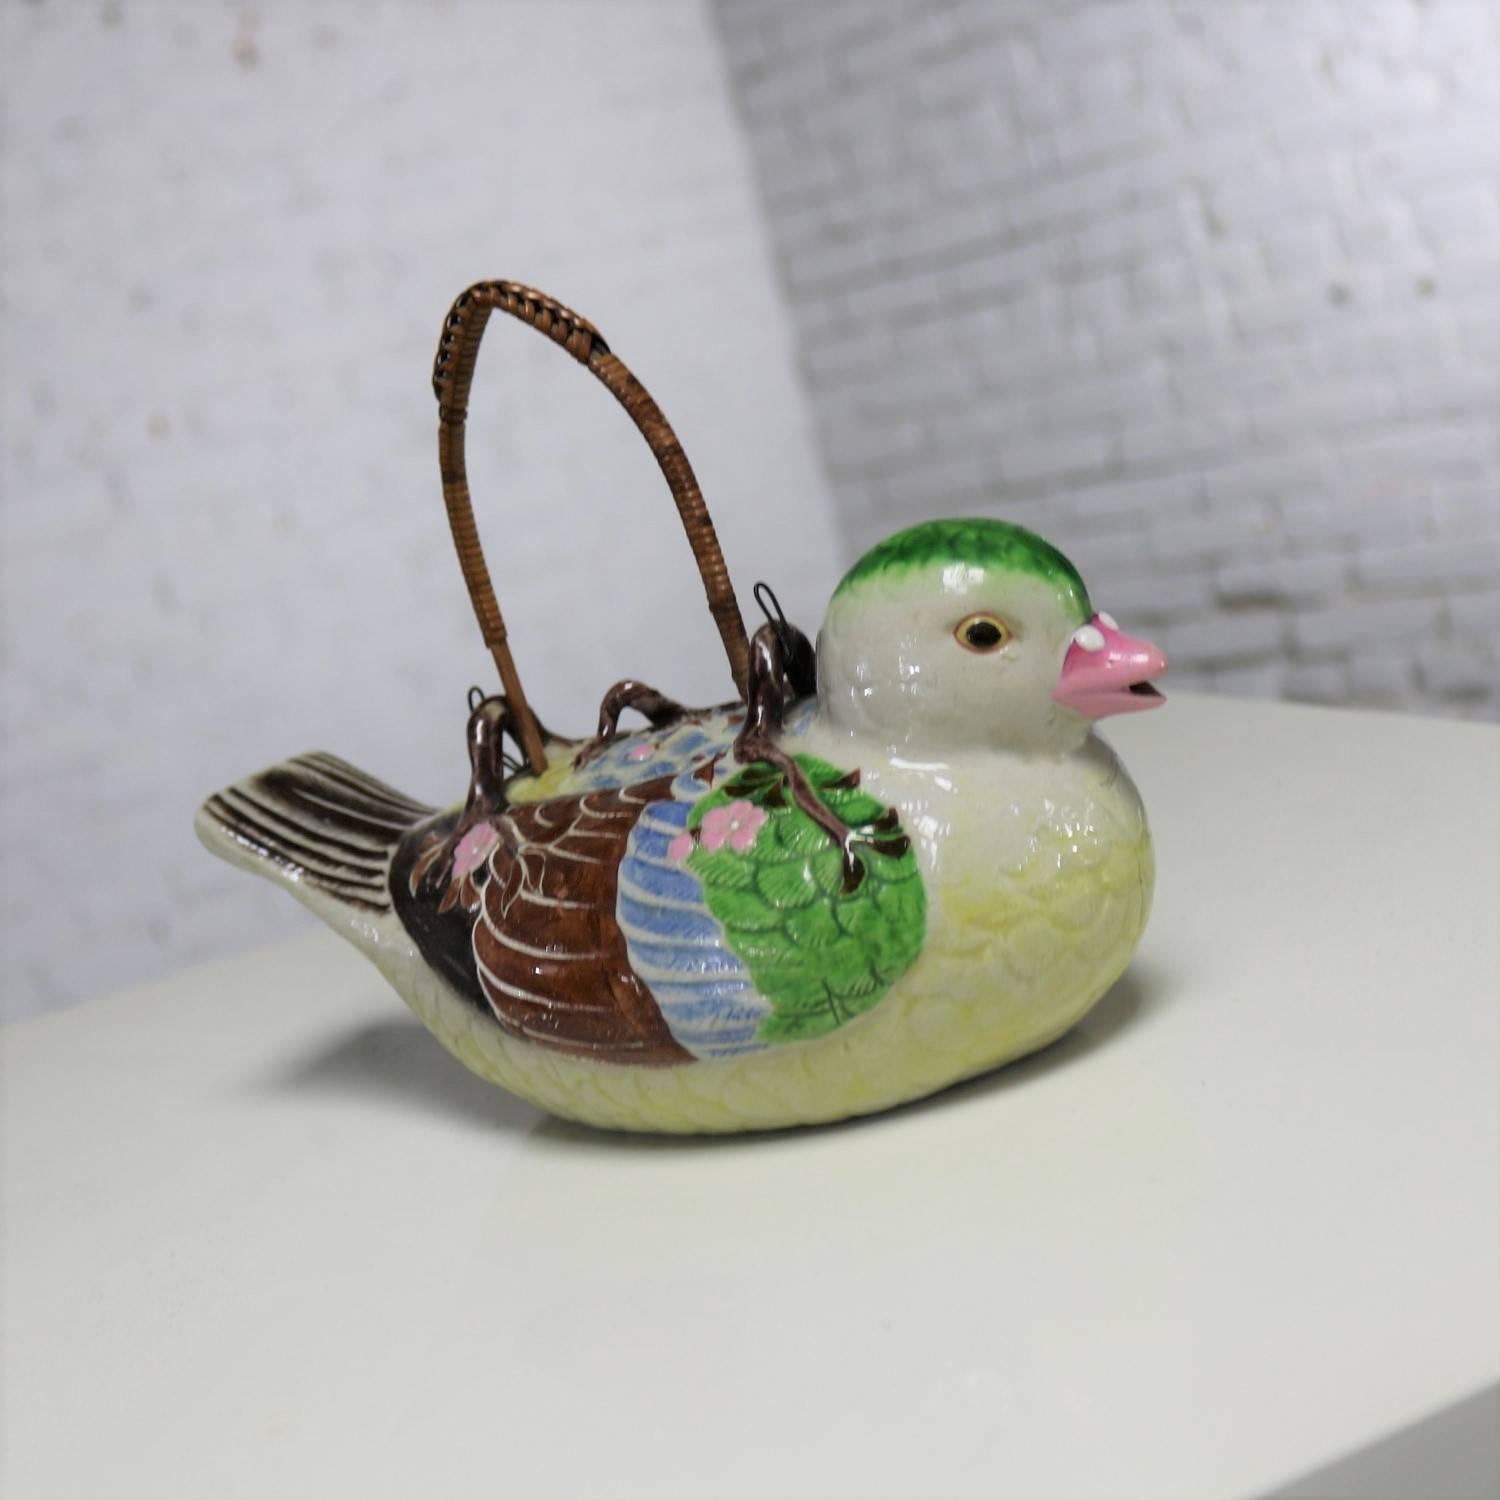 Charming Japanese Banko ware small figural teapot in the shape of a bird whistling, with wrapped rattan removable handle. In excellent condition with no chips, cracks or chiggers we have found, circa late 19th or early 20th century.

Such a